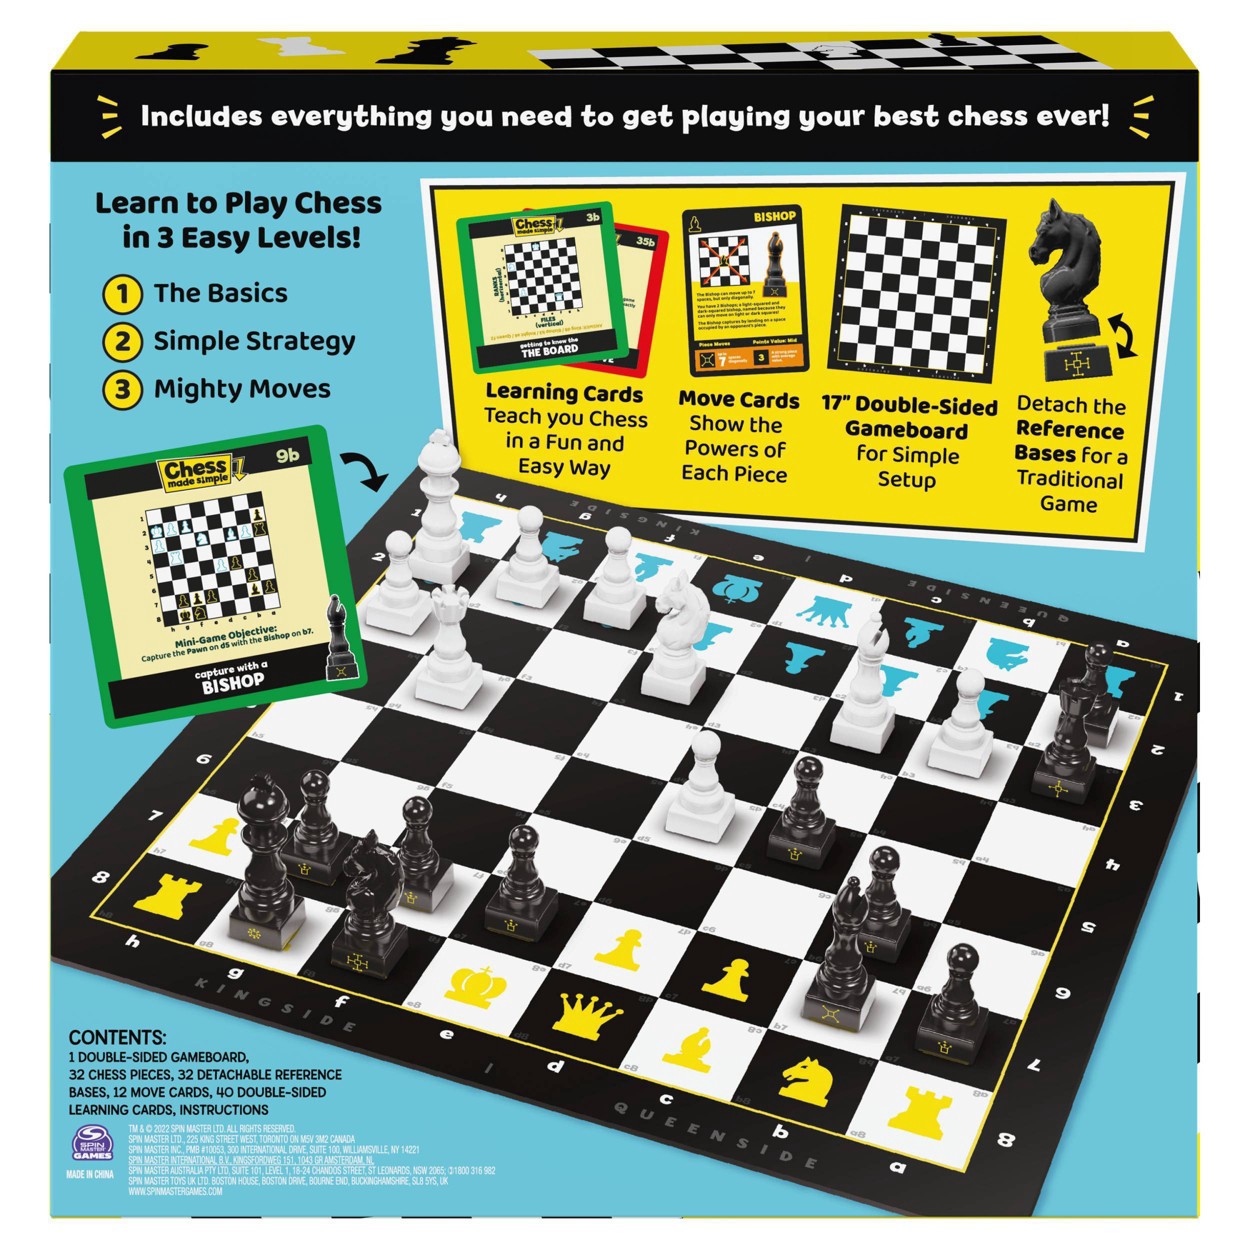  Less Chess- A New Take on Chess from Spin Master Games